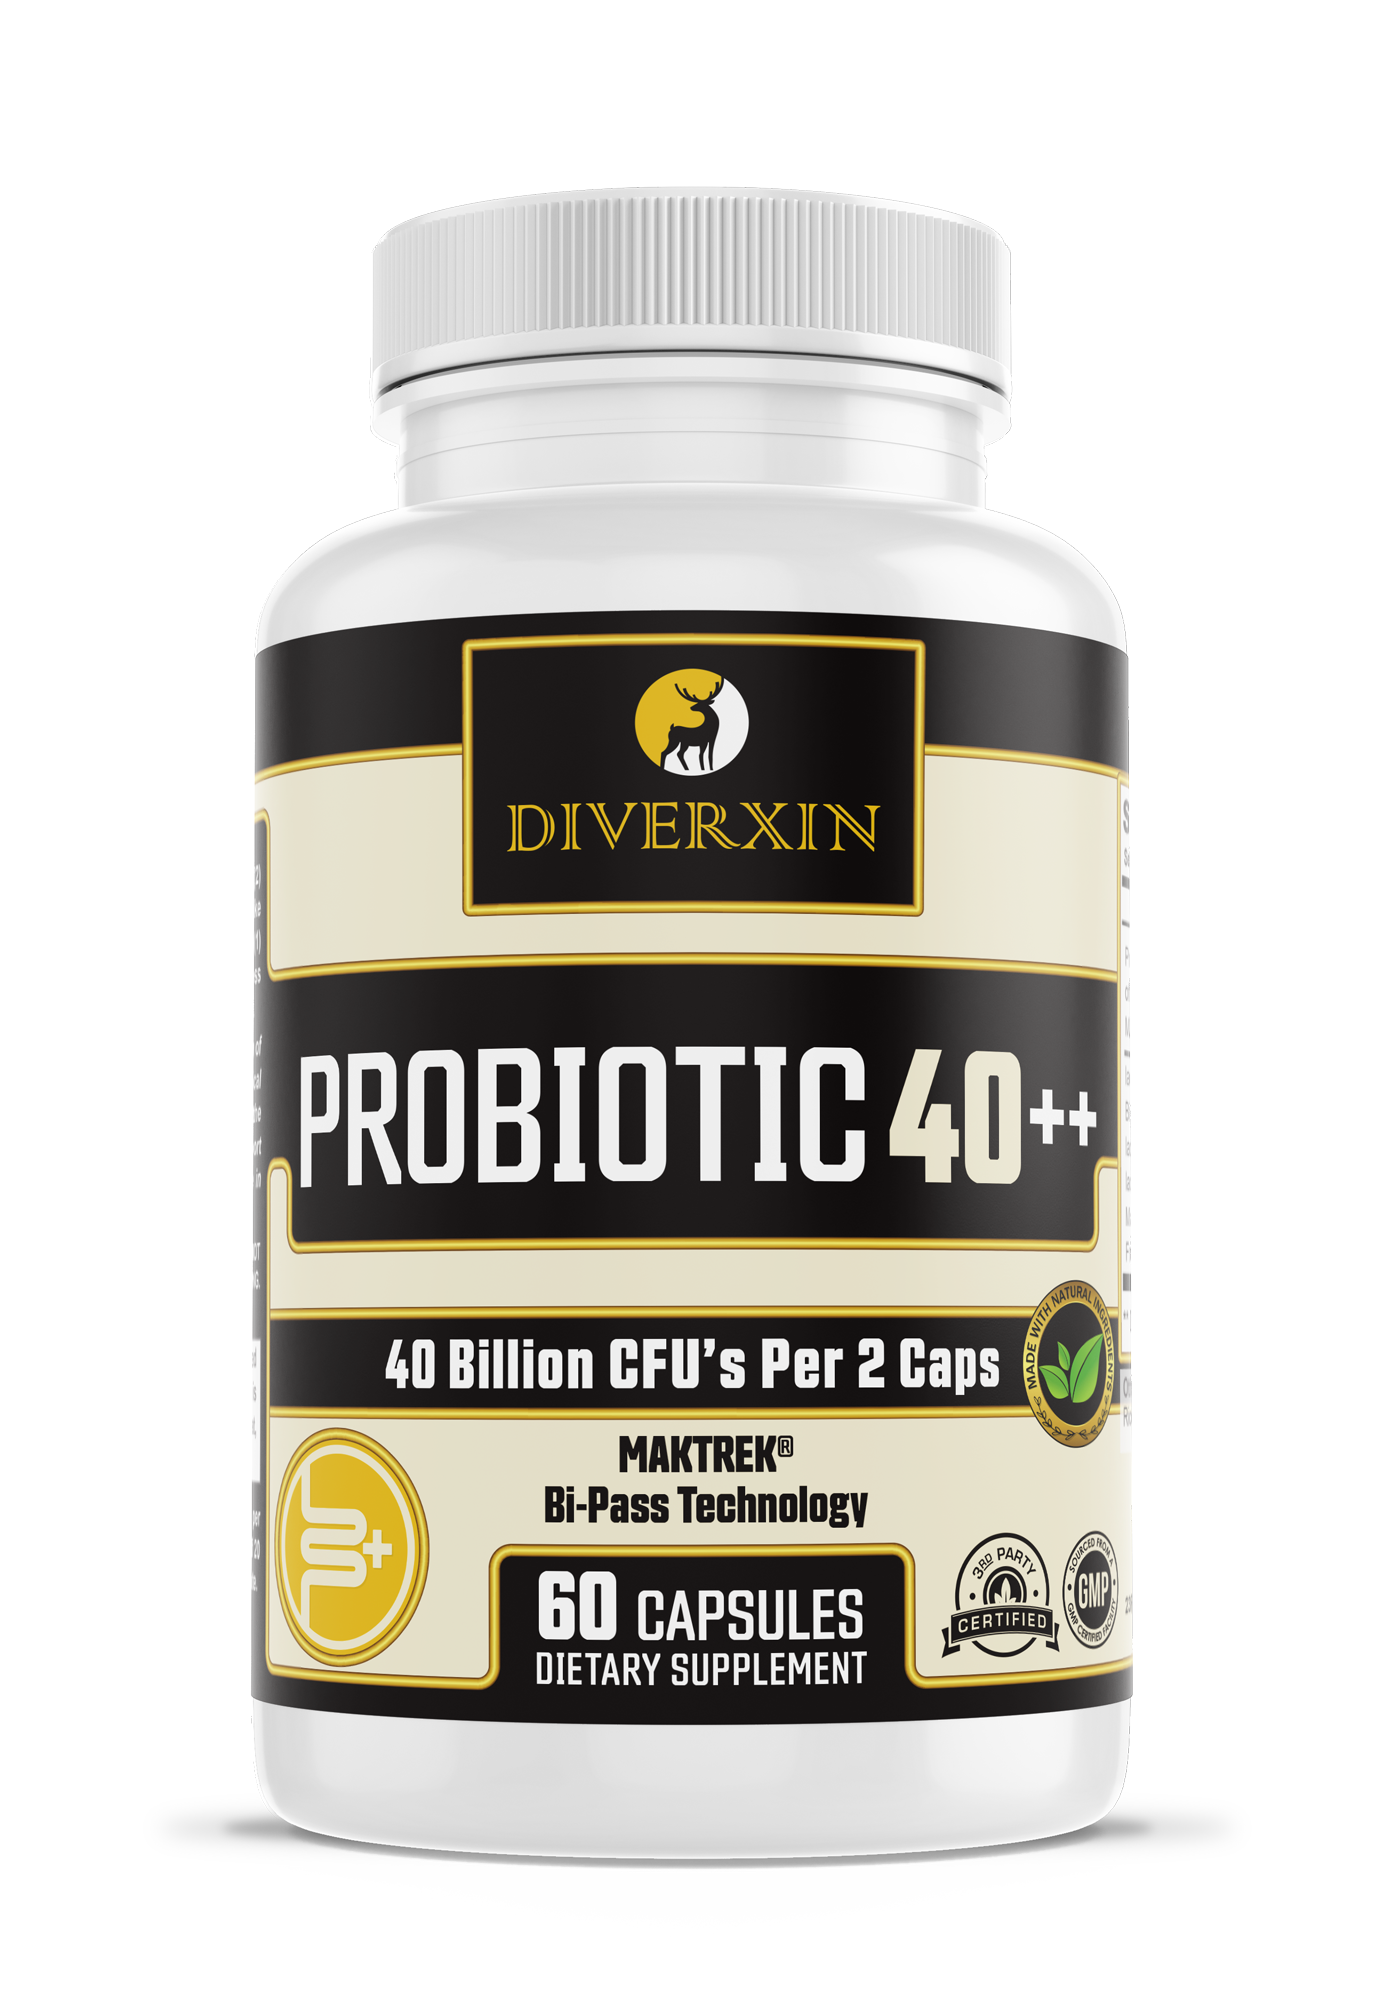 DIVERXIn PRObiotics 40++ - RED HOT Offer with UPSELL thumbnail